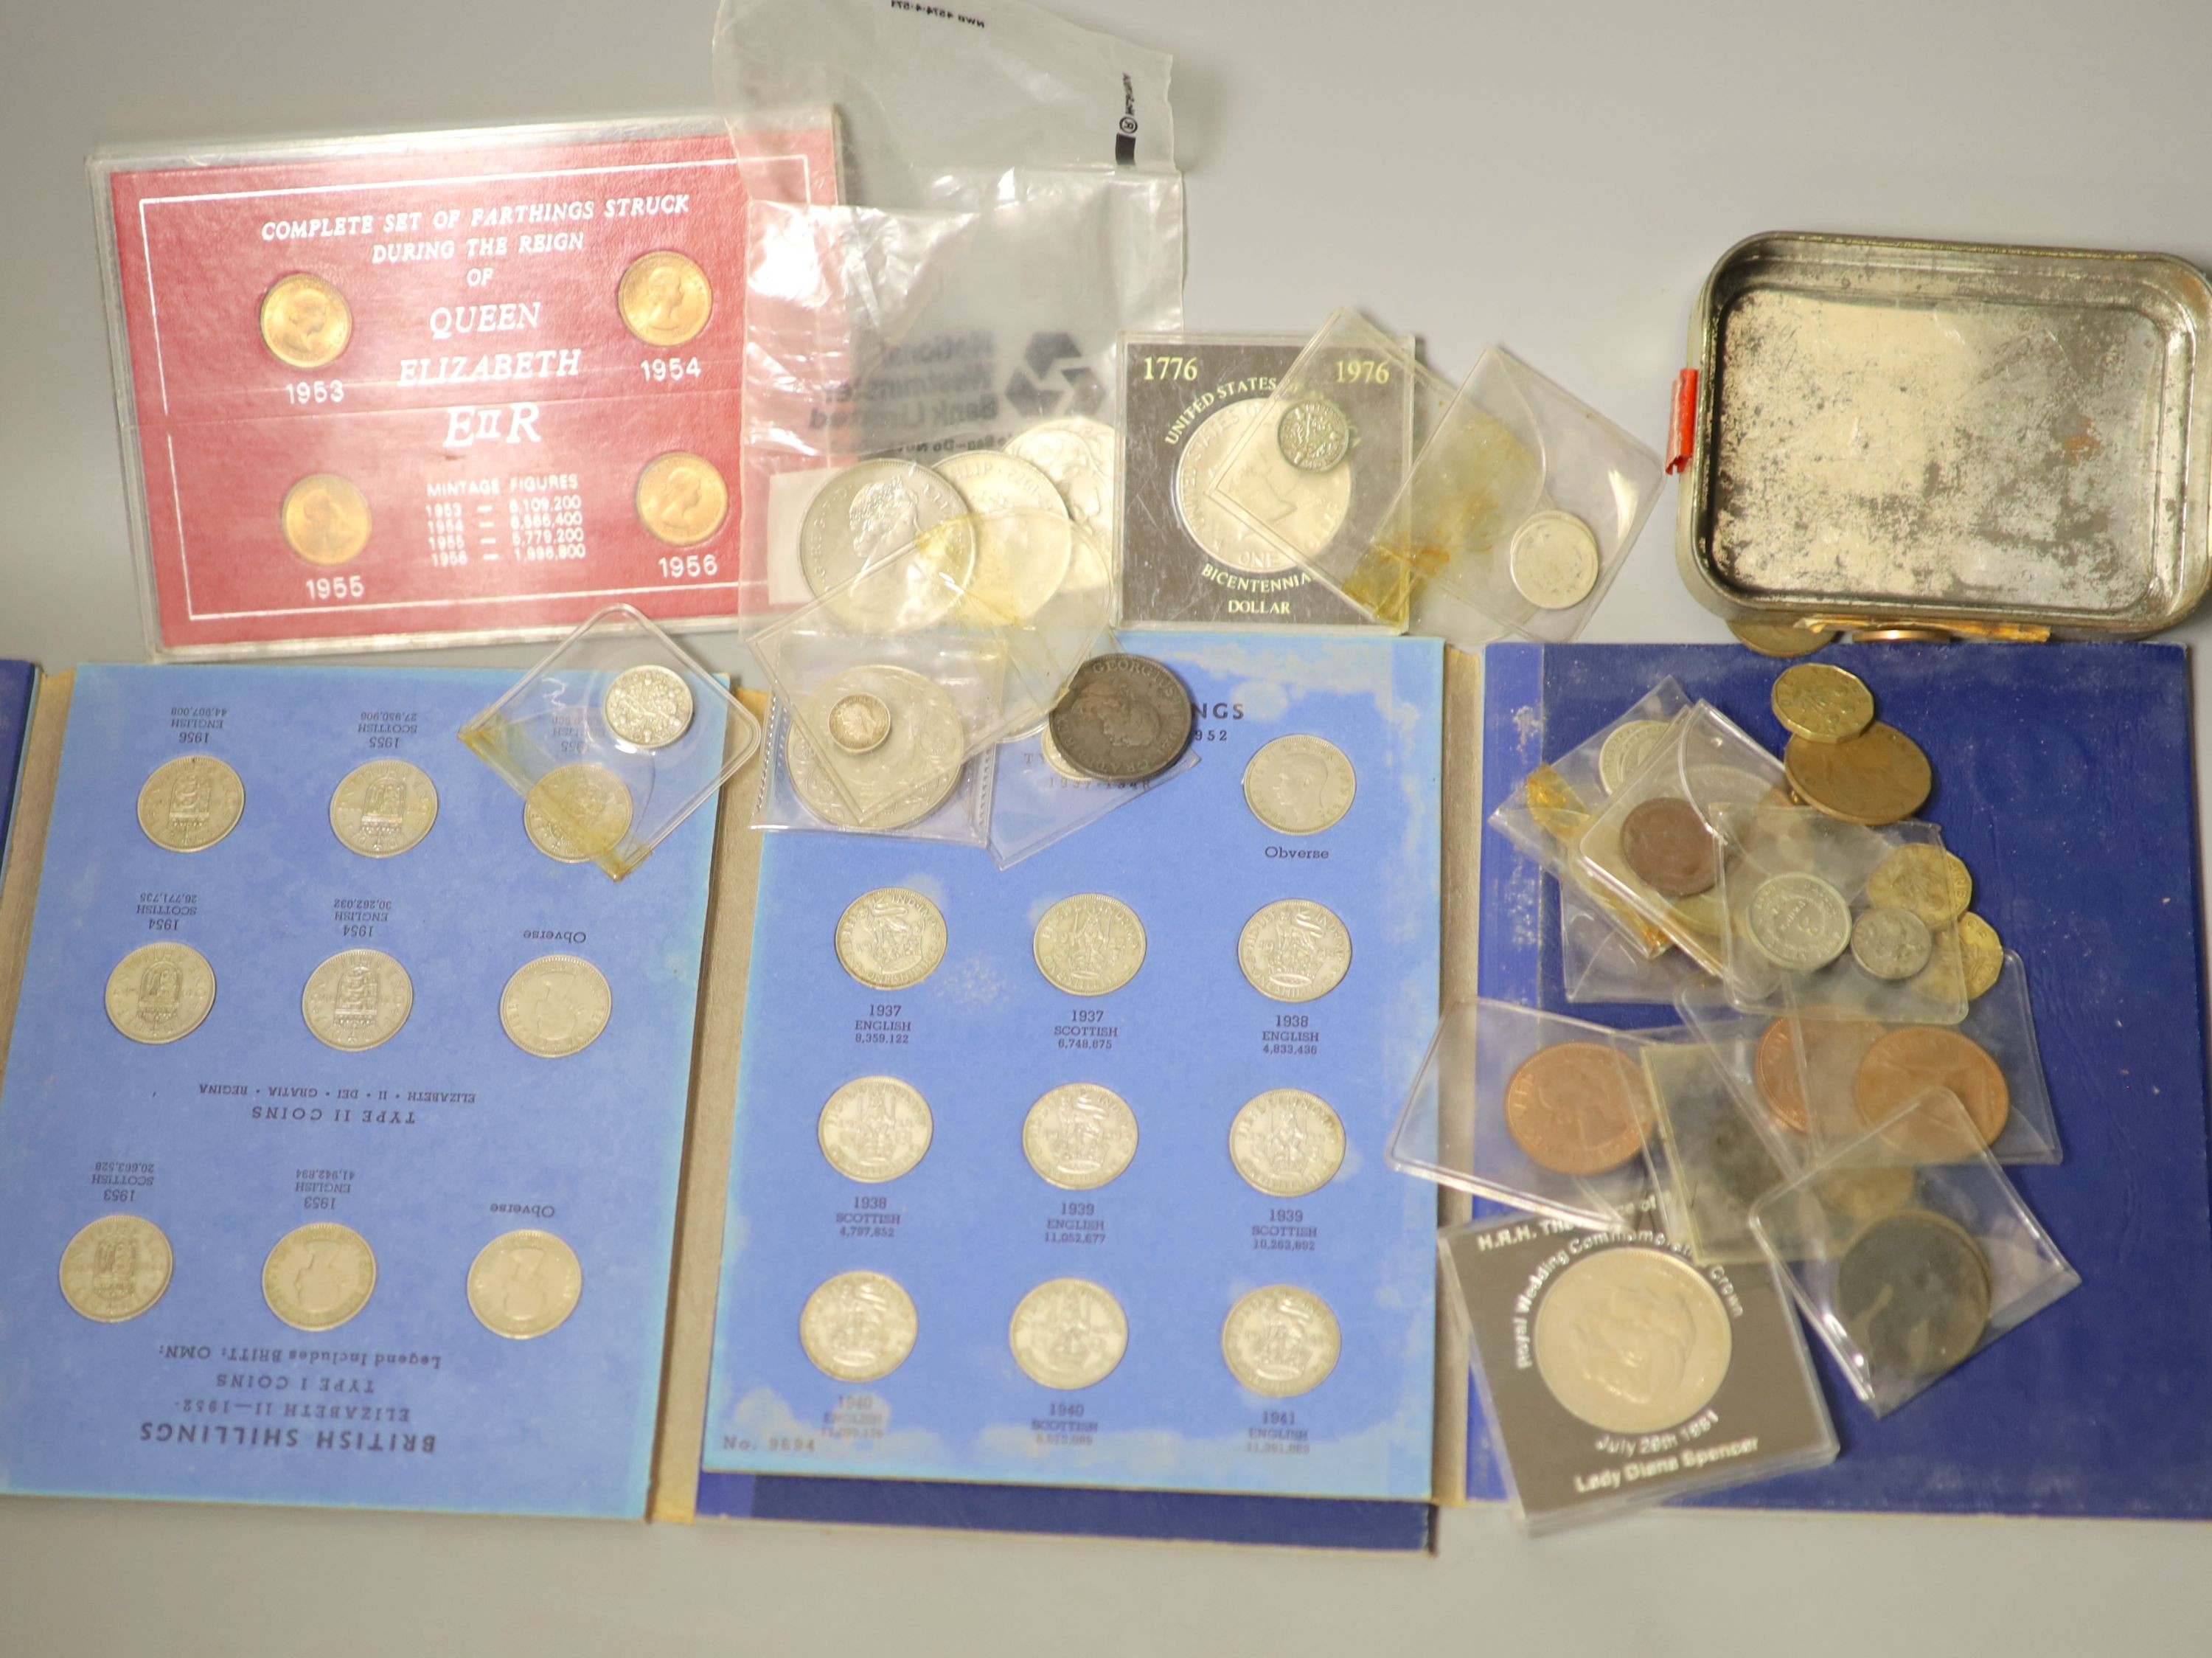 A collection of Queen Elizabeth II coin year sets, 1970-1976, a George V 1928 part maundy set, 1d, 2d and 4d, various Crowns, threepences etc.